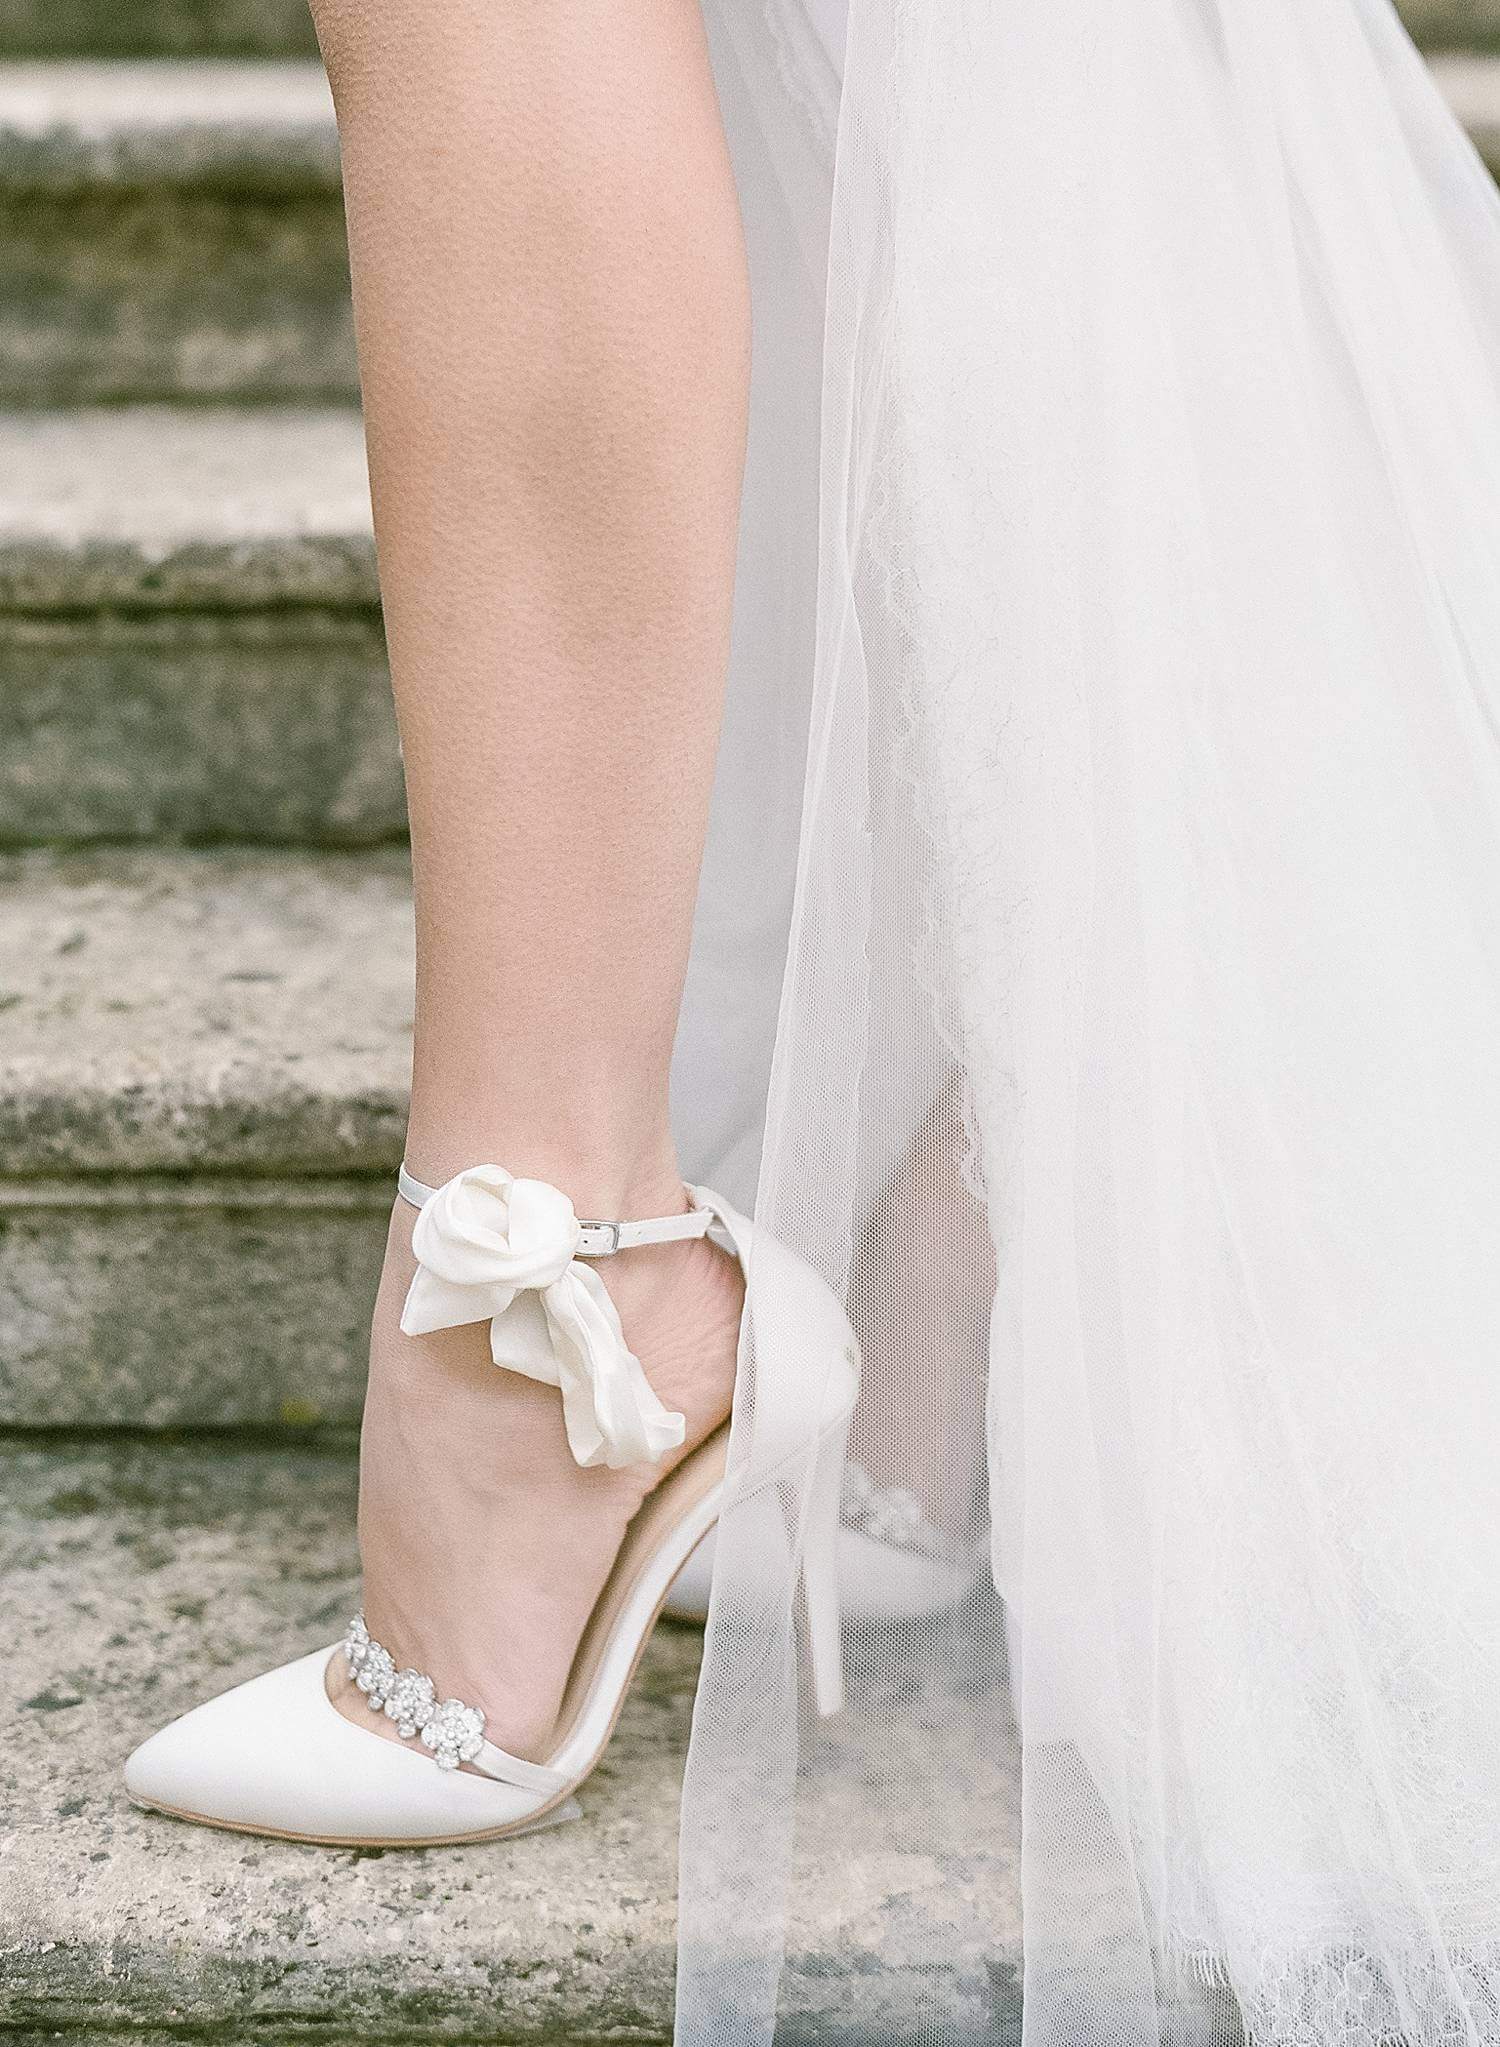 Detail photo of bride's shoes while at alter for her elopement in Bordeaux France.